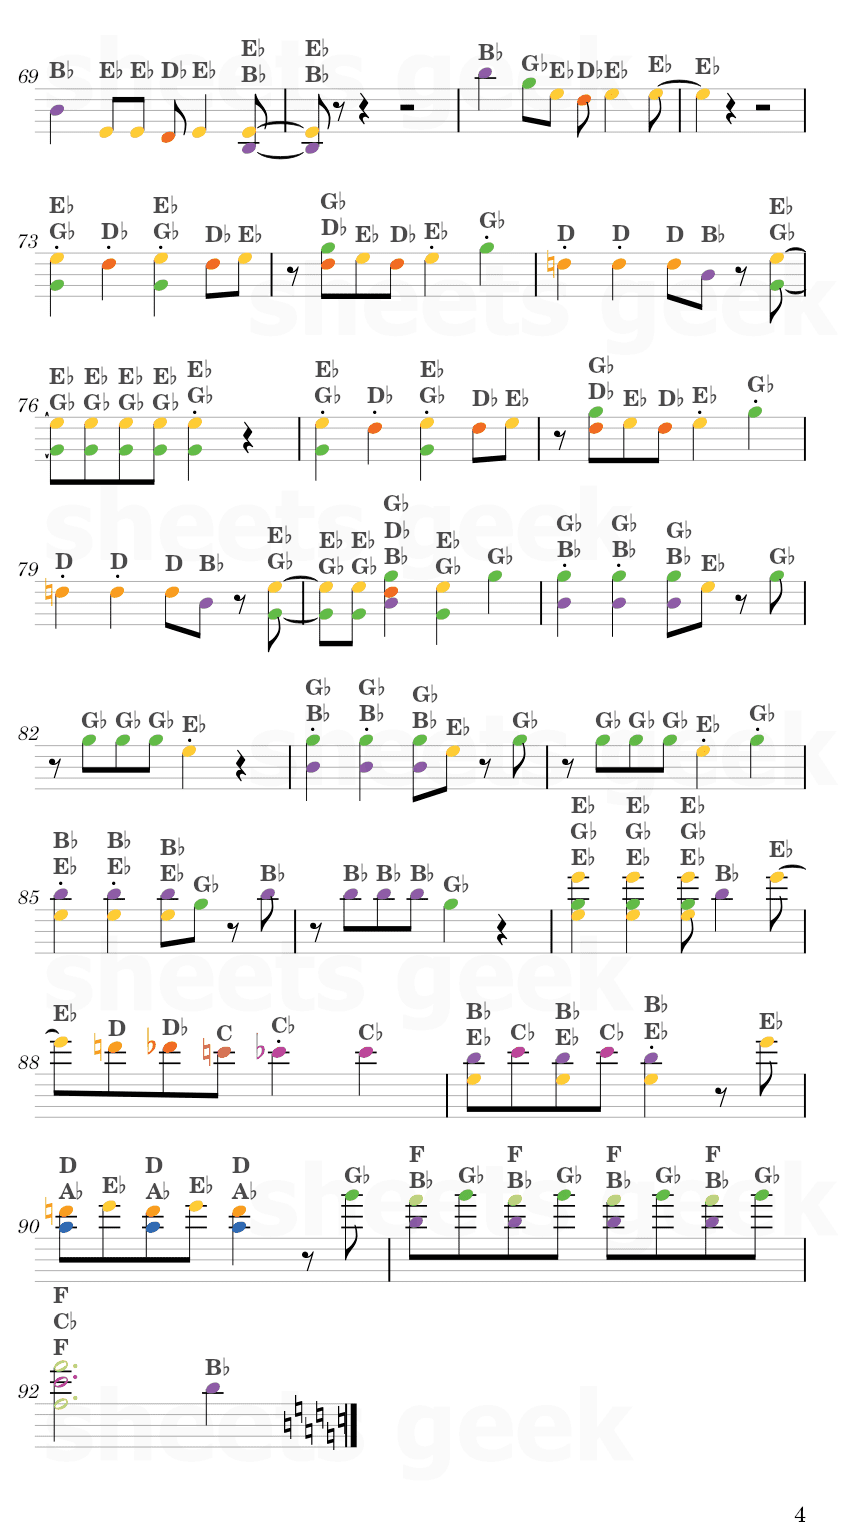 Bug - Nightcord at 25:00 (Project Sekai) Easy Sheet Music Free for piano, keyboard, flute, violin, sax, cello page 4